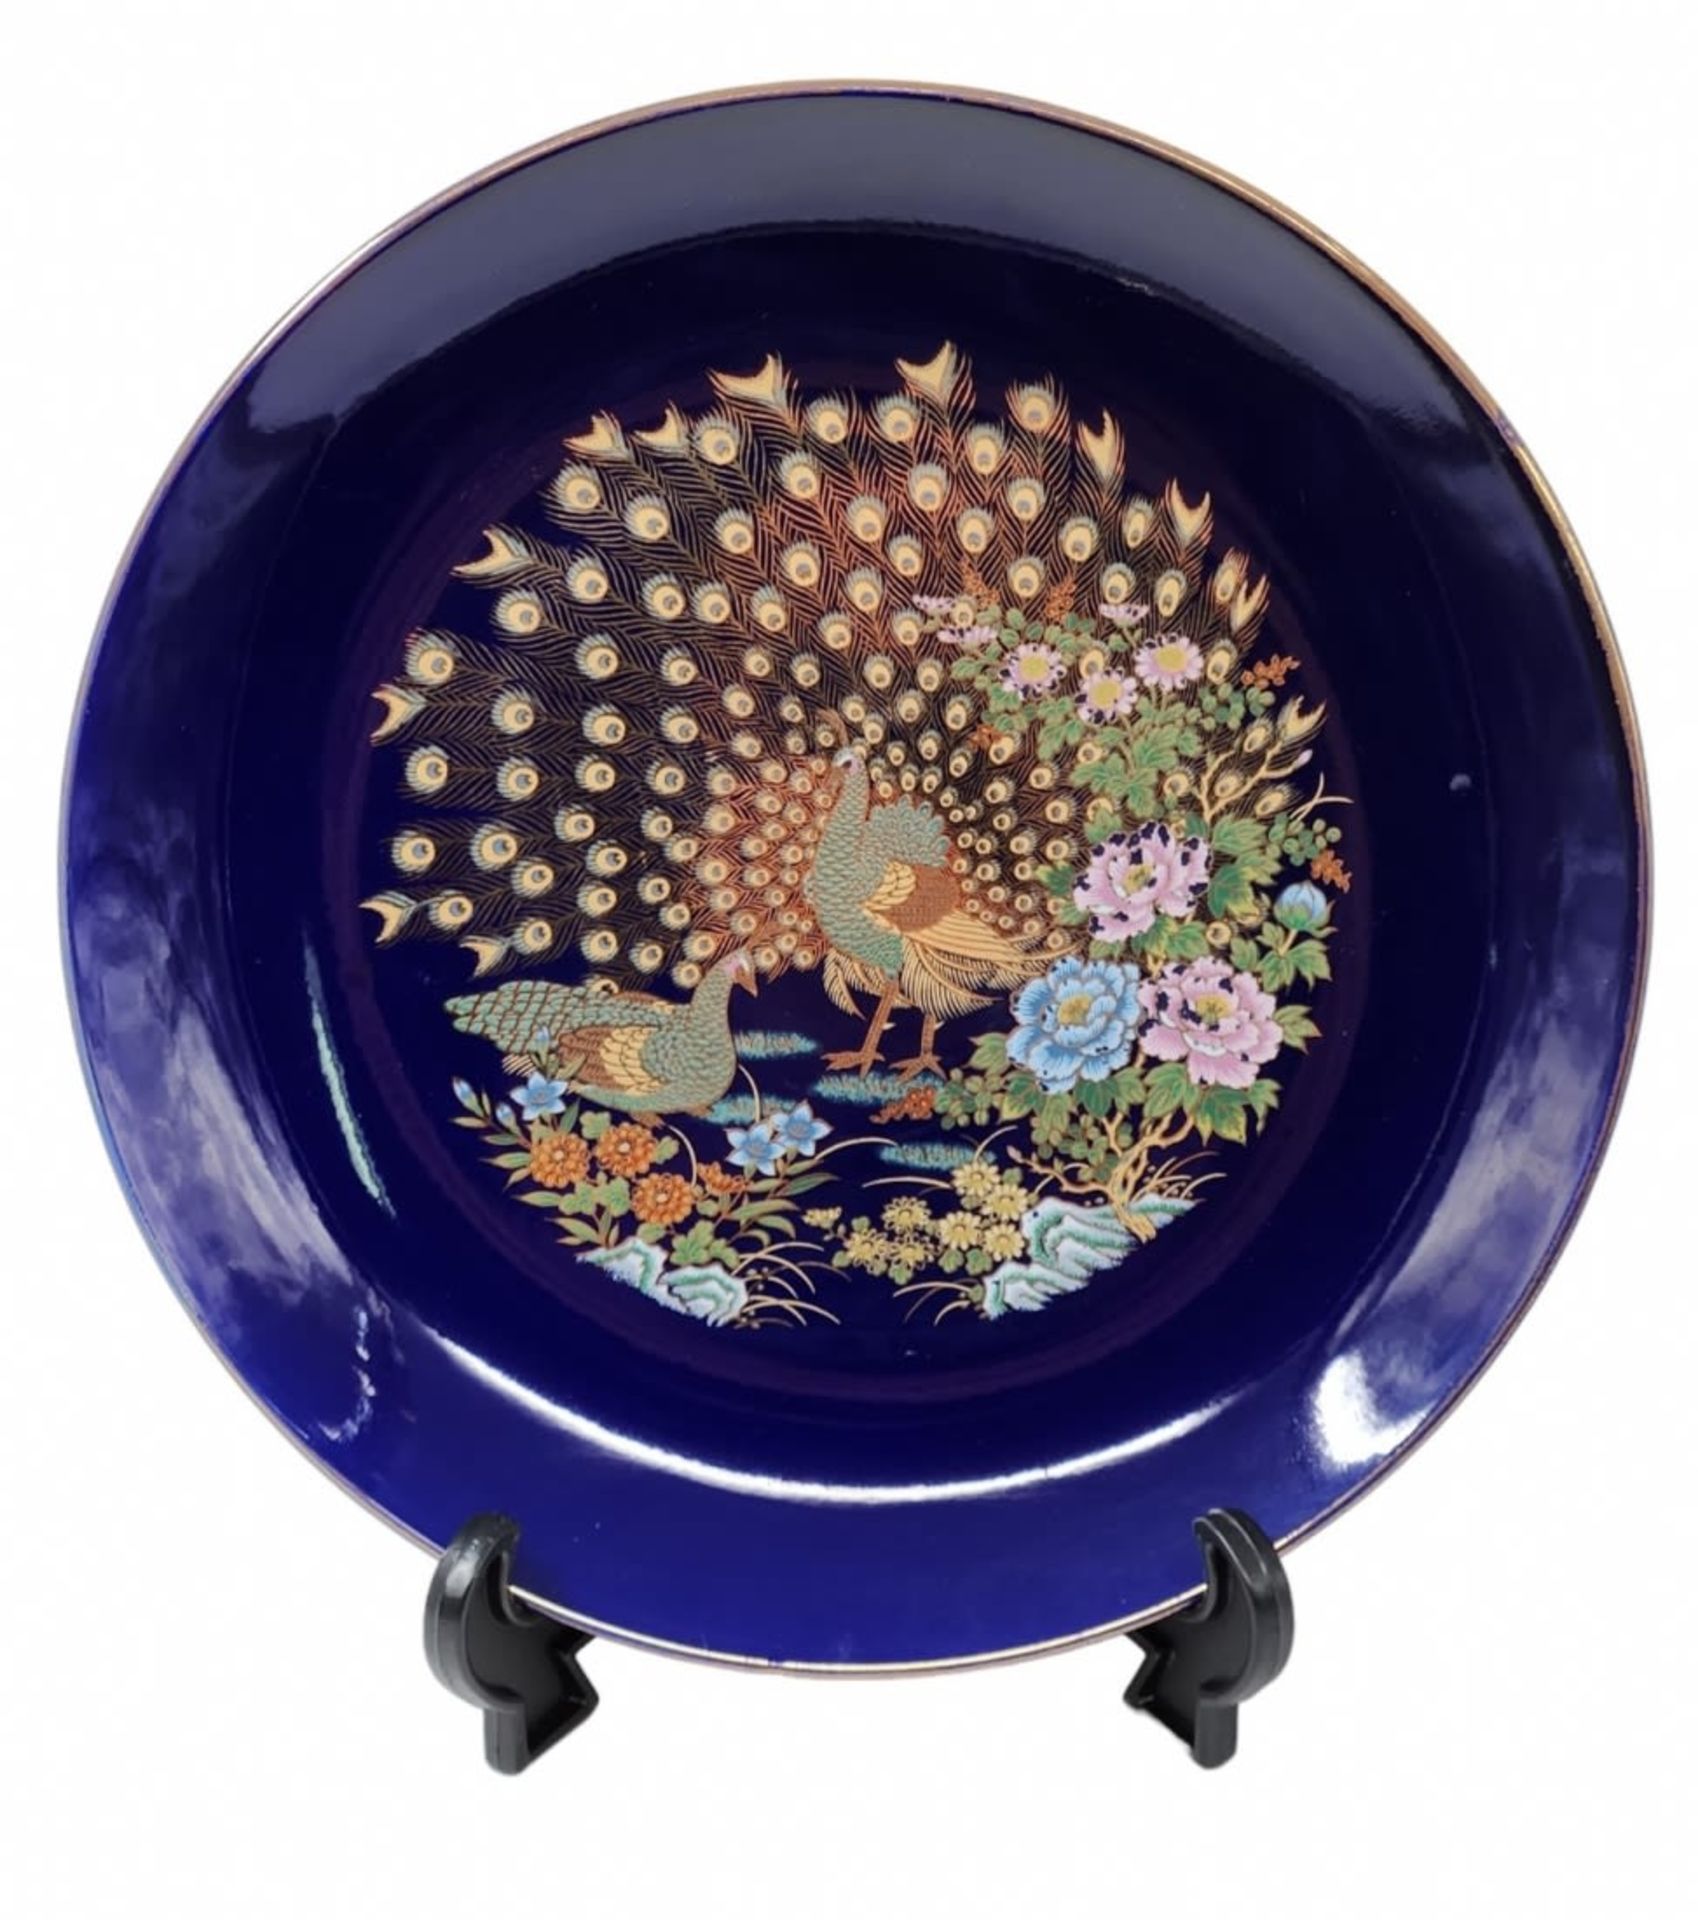 Round Japanese porcelain plate, decorated with a peacock pattern on a cobalt blue background.